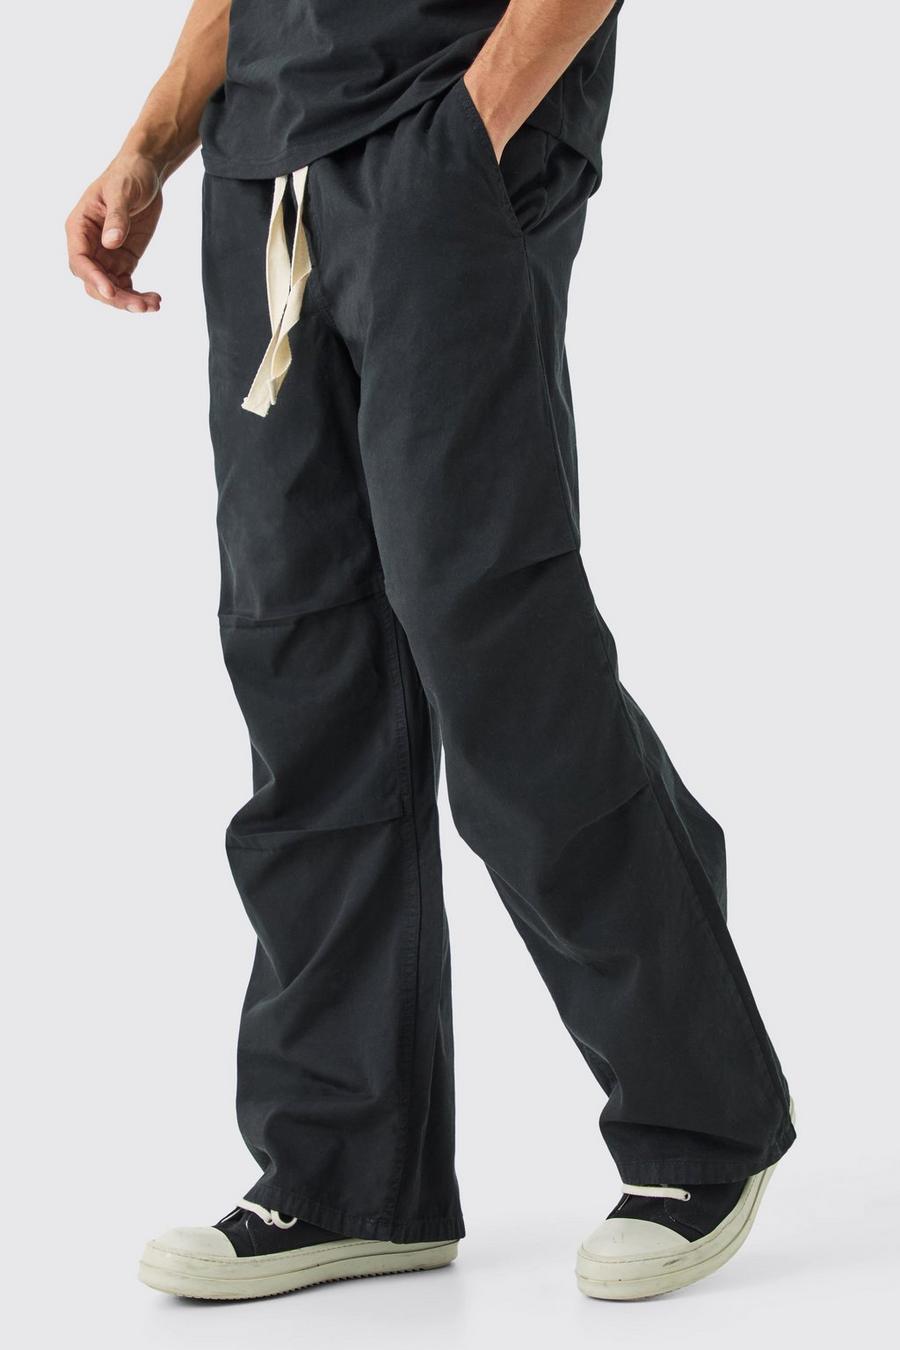 Black Elasticated Waist Contrast Drawcord Baggy Trouser 